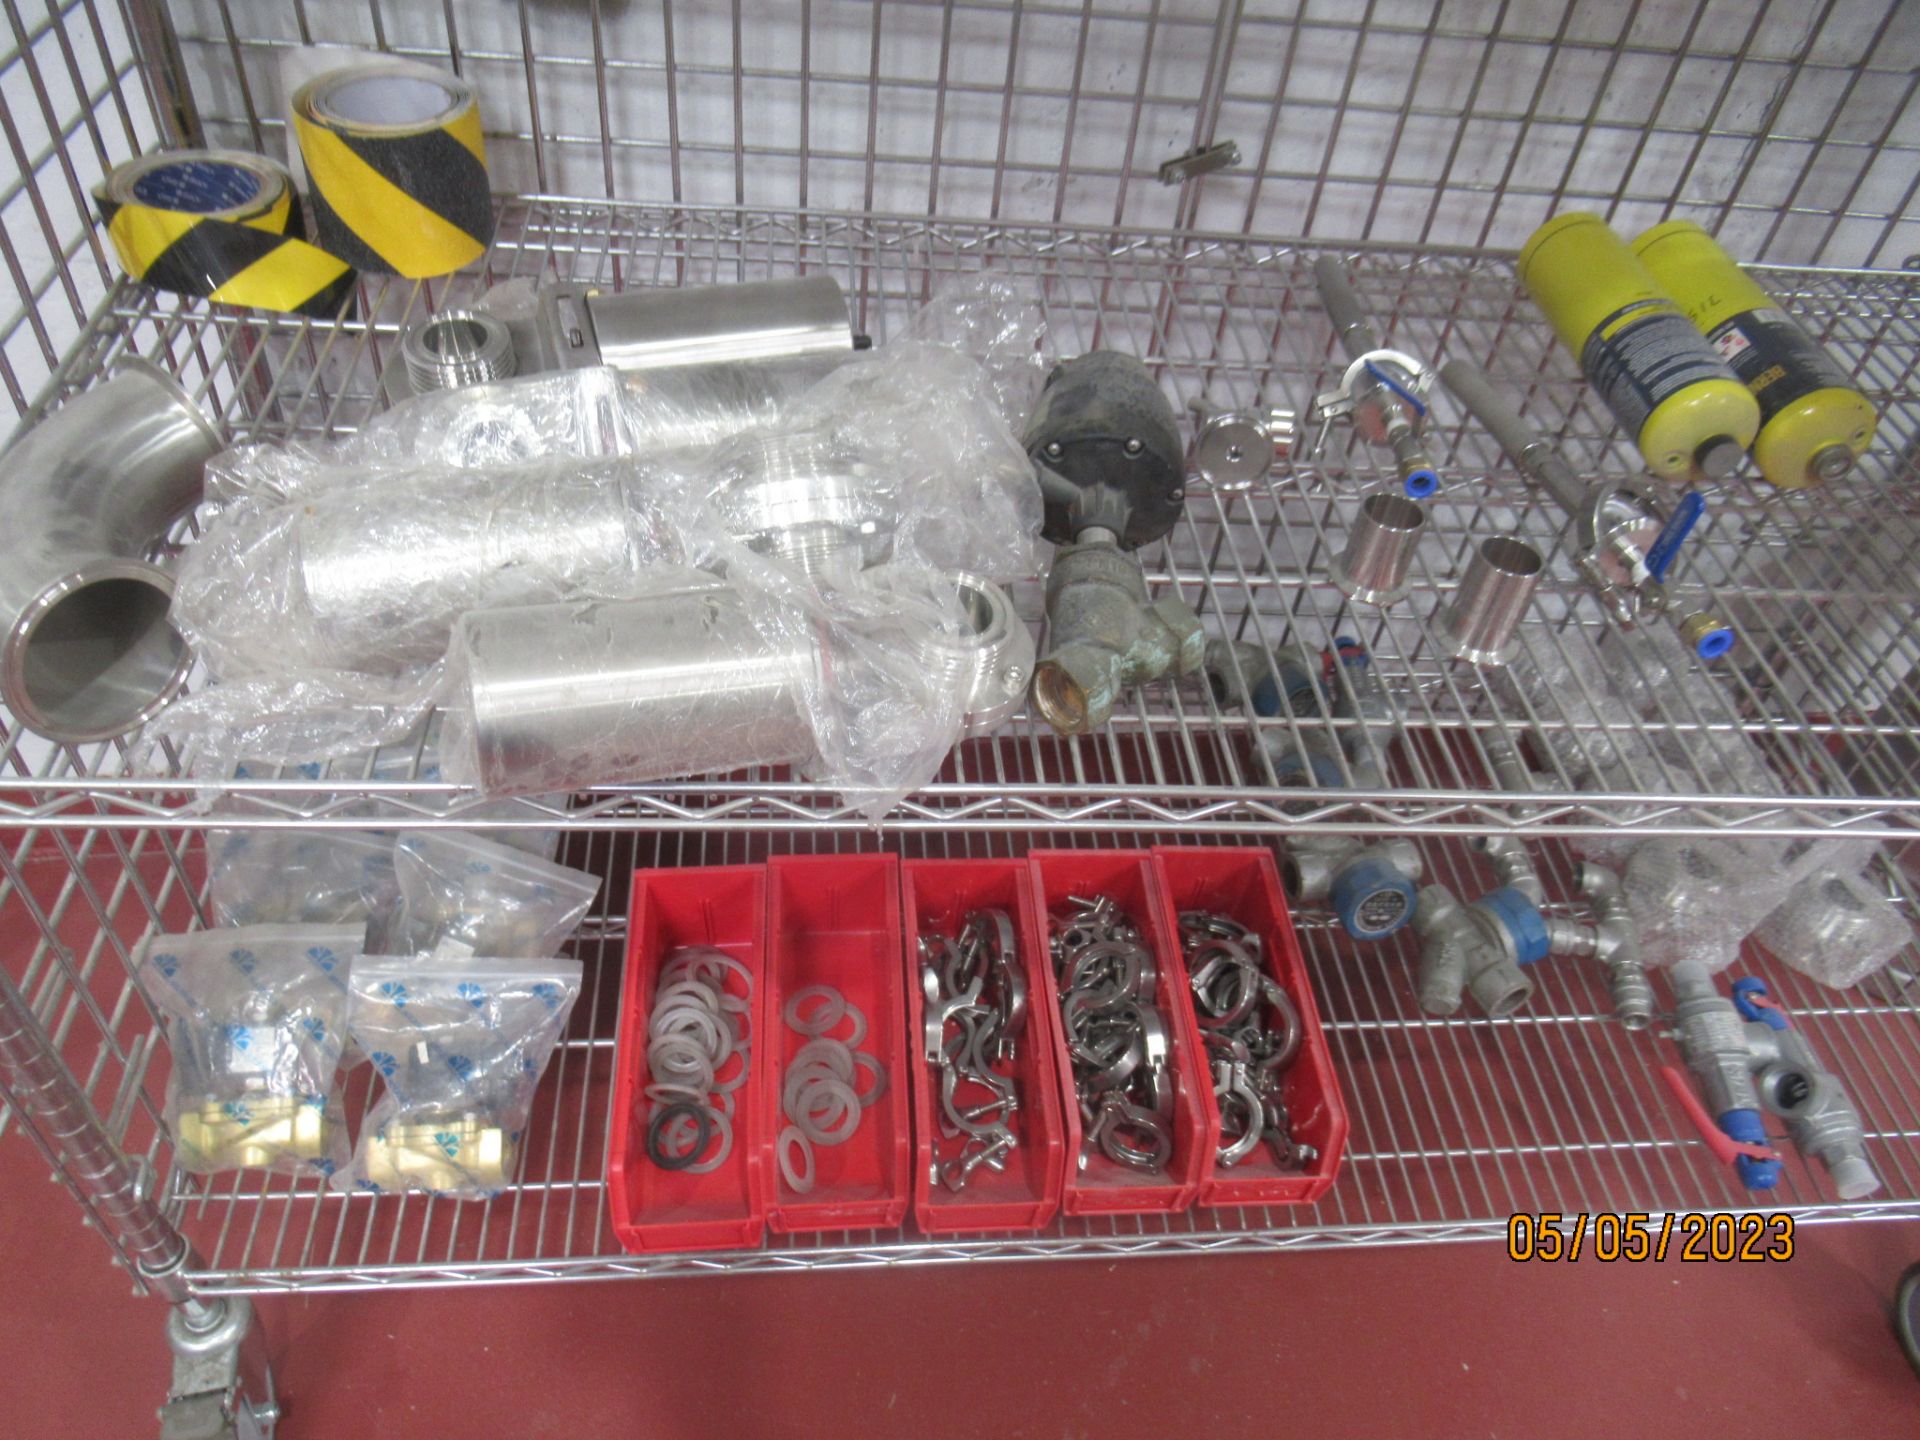 Wire Shelving Units with Assorted Stainless Steel Valves, Hoses, Clamps, Fittings, Spare Pipe, Etc - Image 3 of 6